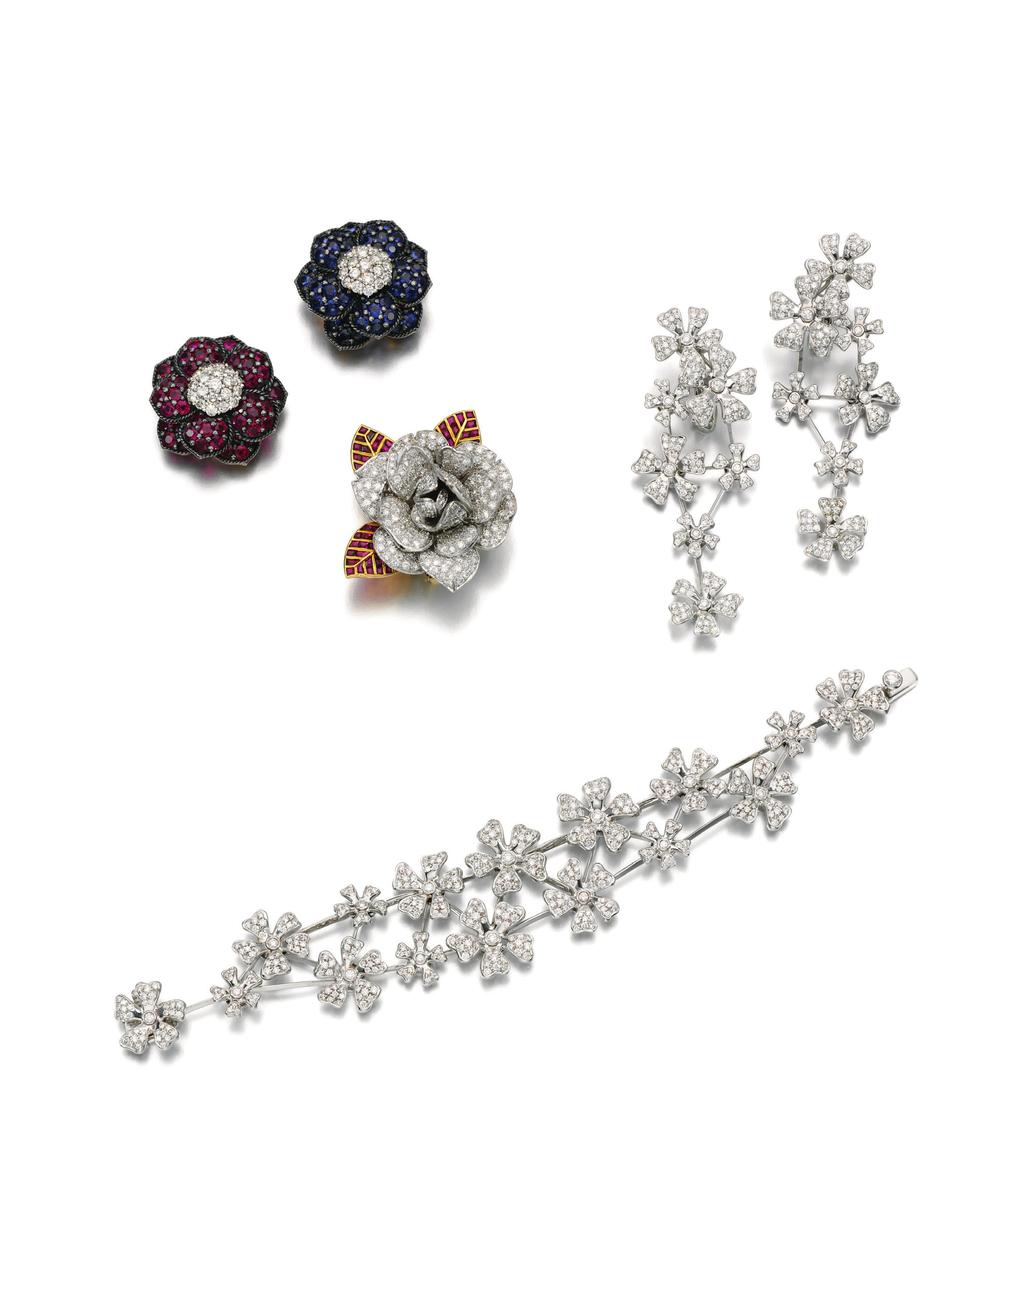 SIGNED JEWELS Modern, signed jewels are well-represented with examples from famous houses such as De Beers and Graff.